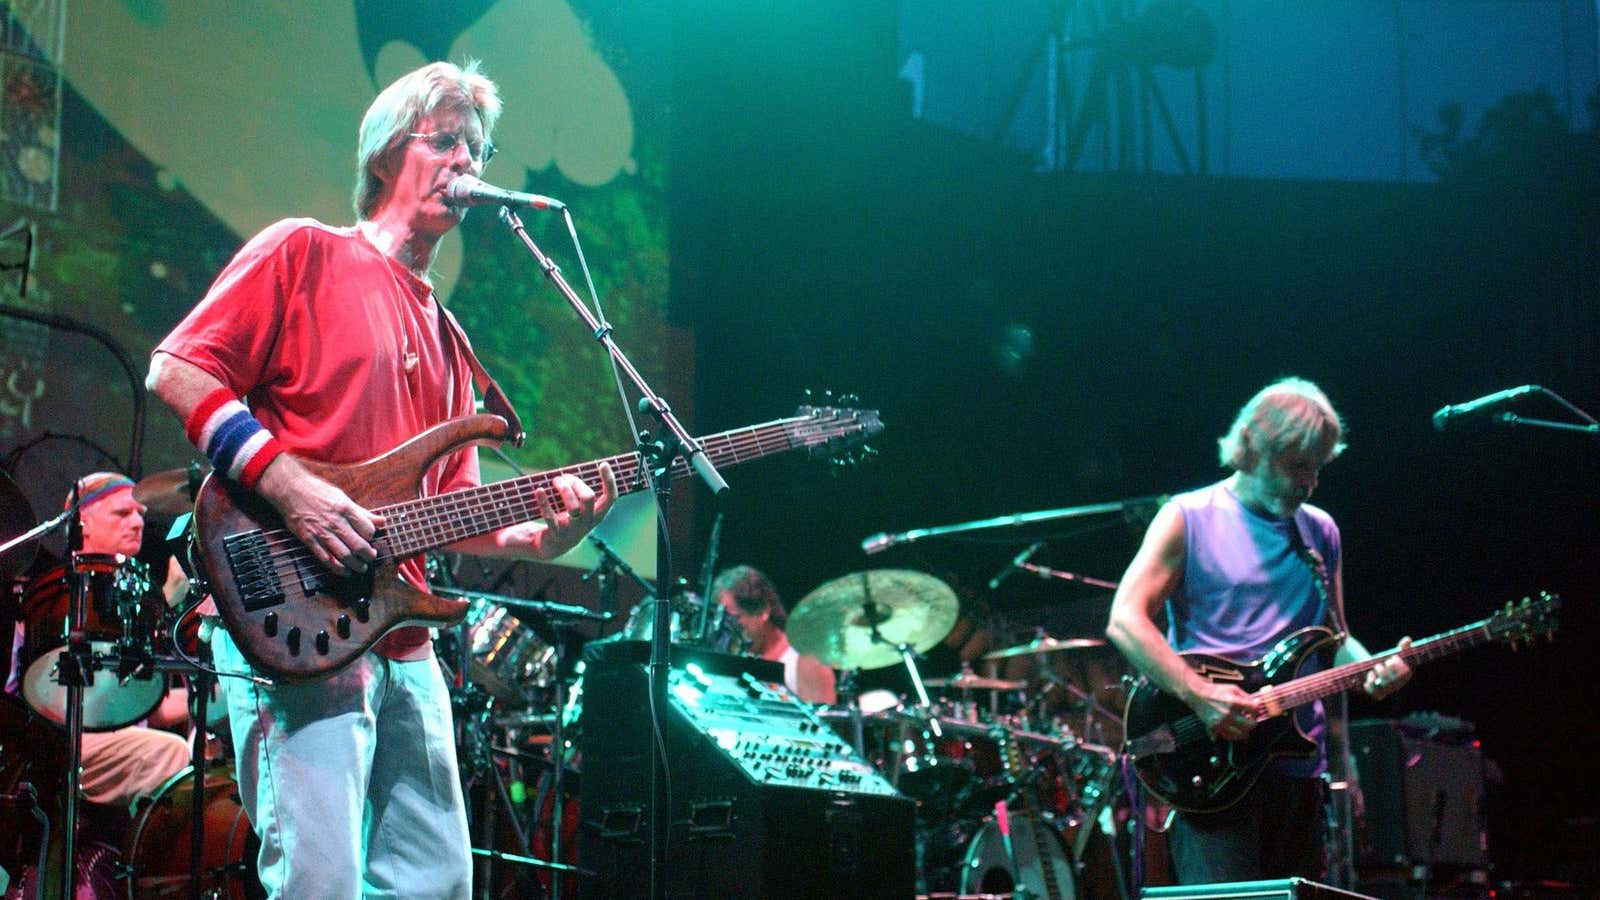 Phil Lesh rocks out for justice.